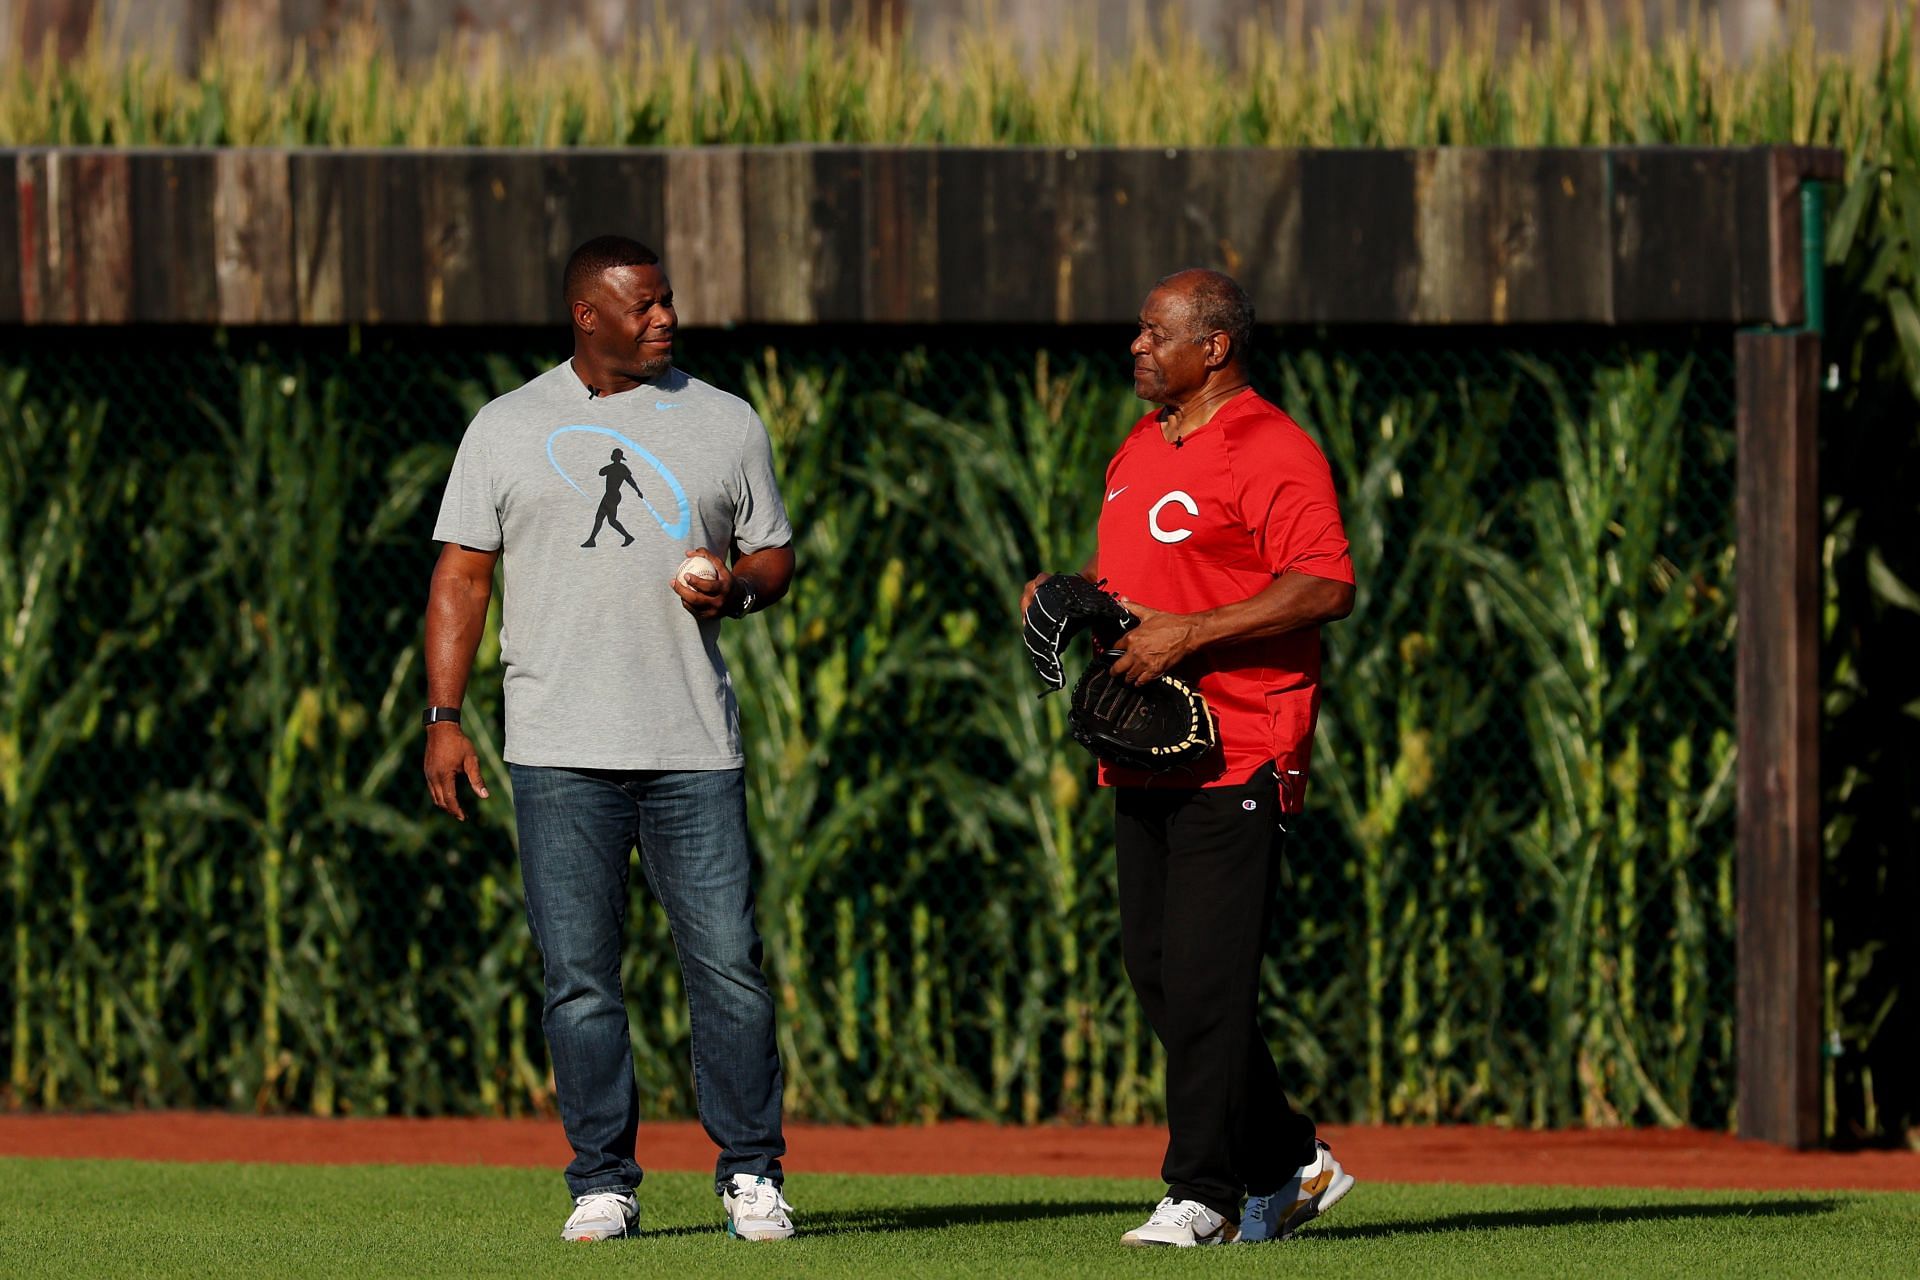 MLB's Field of Dreams Game opens with Ken Griffey Jr., Sr. having